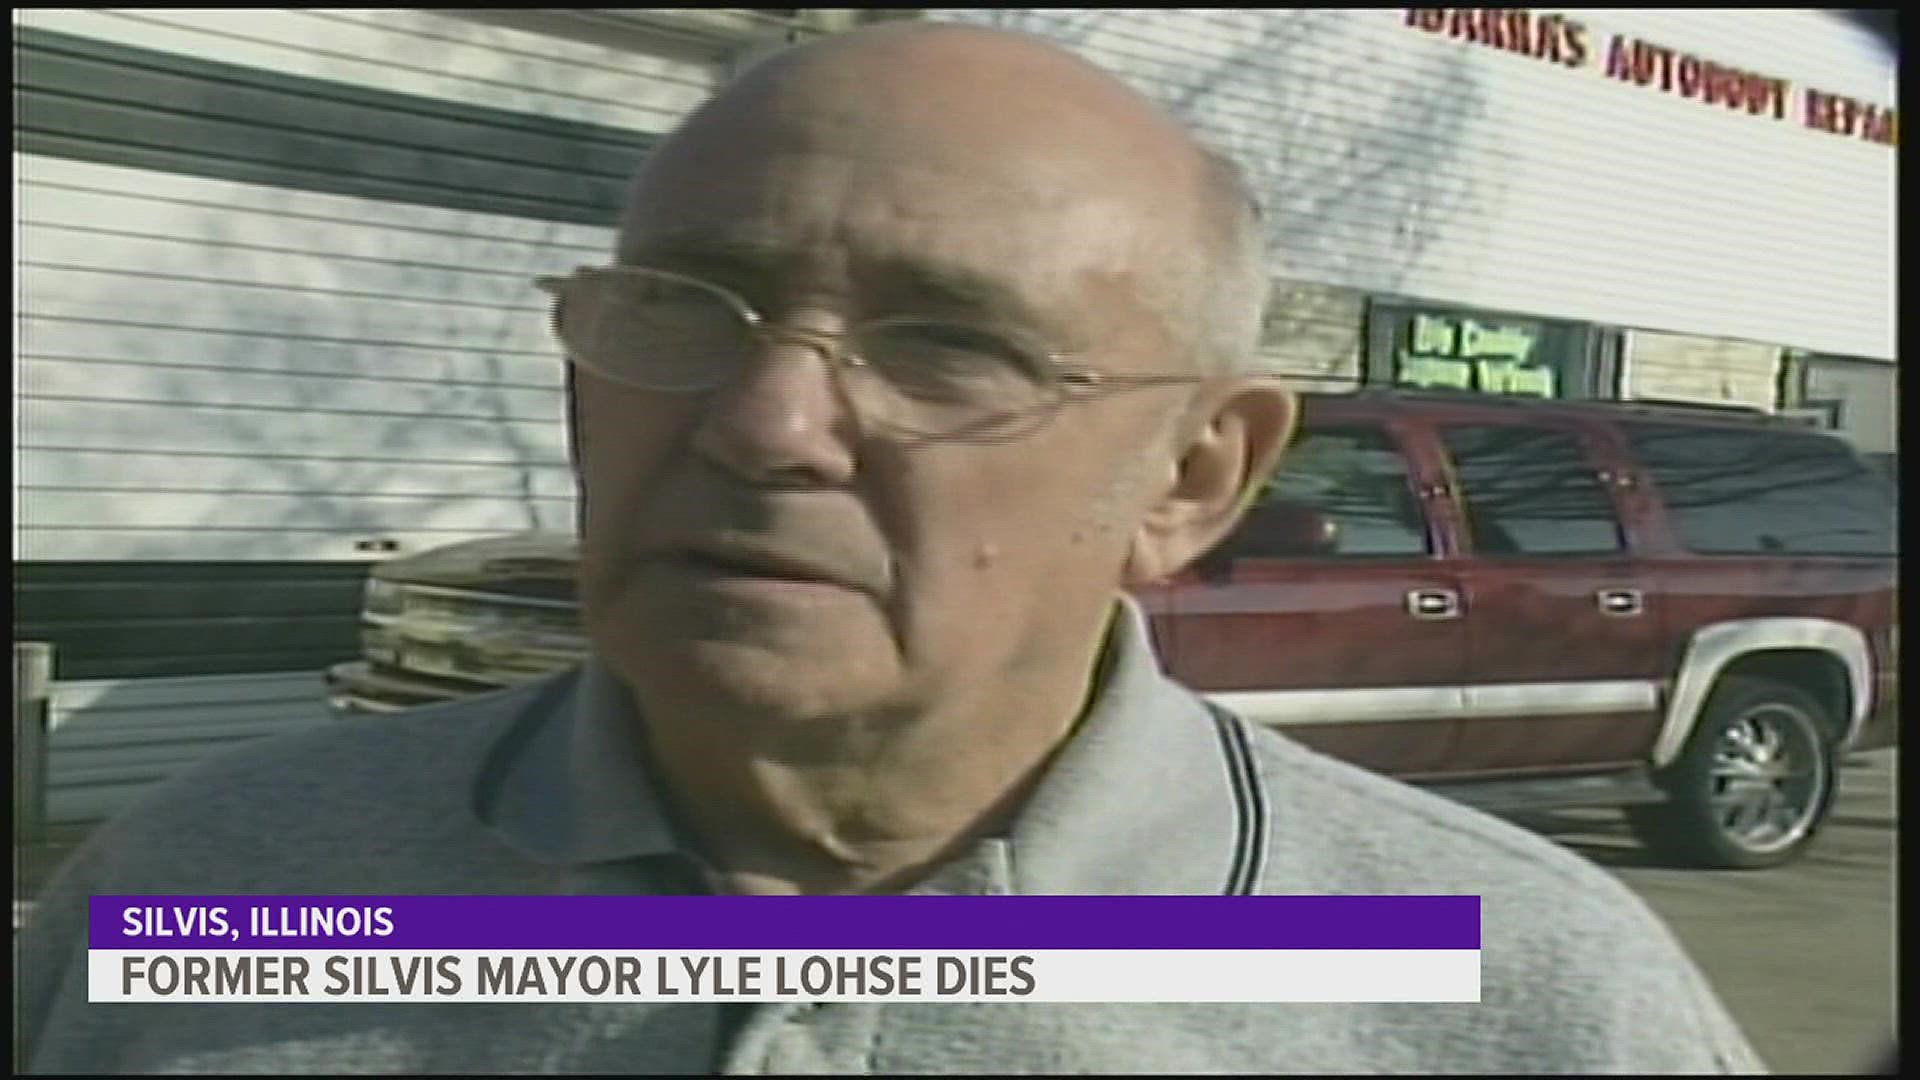 Former Silvis Mayor Lyle Lohse, 88, died on April 11. He served as the city's mayor from 1997 to 2009.